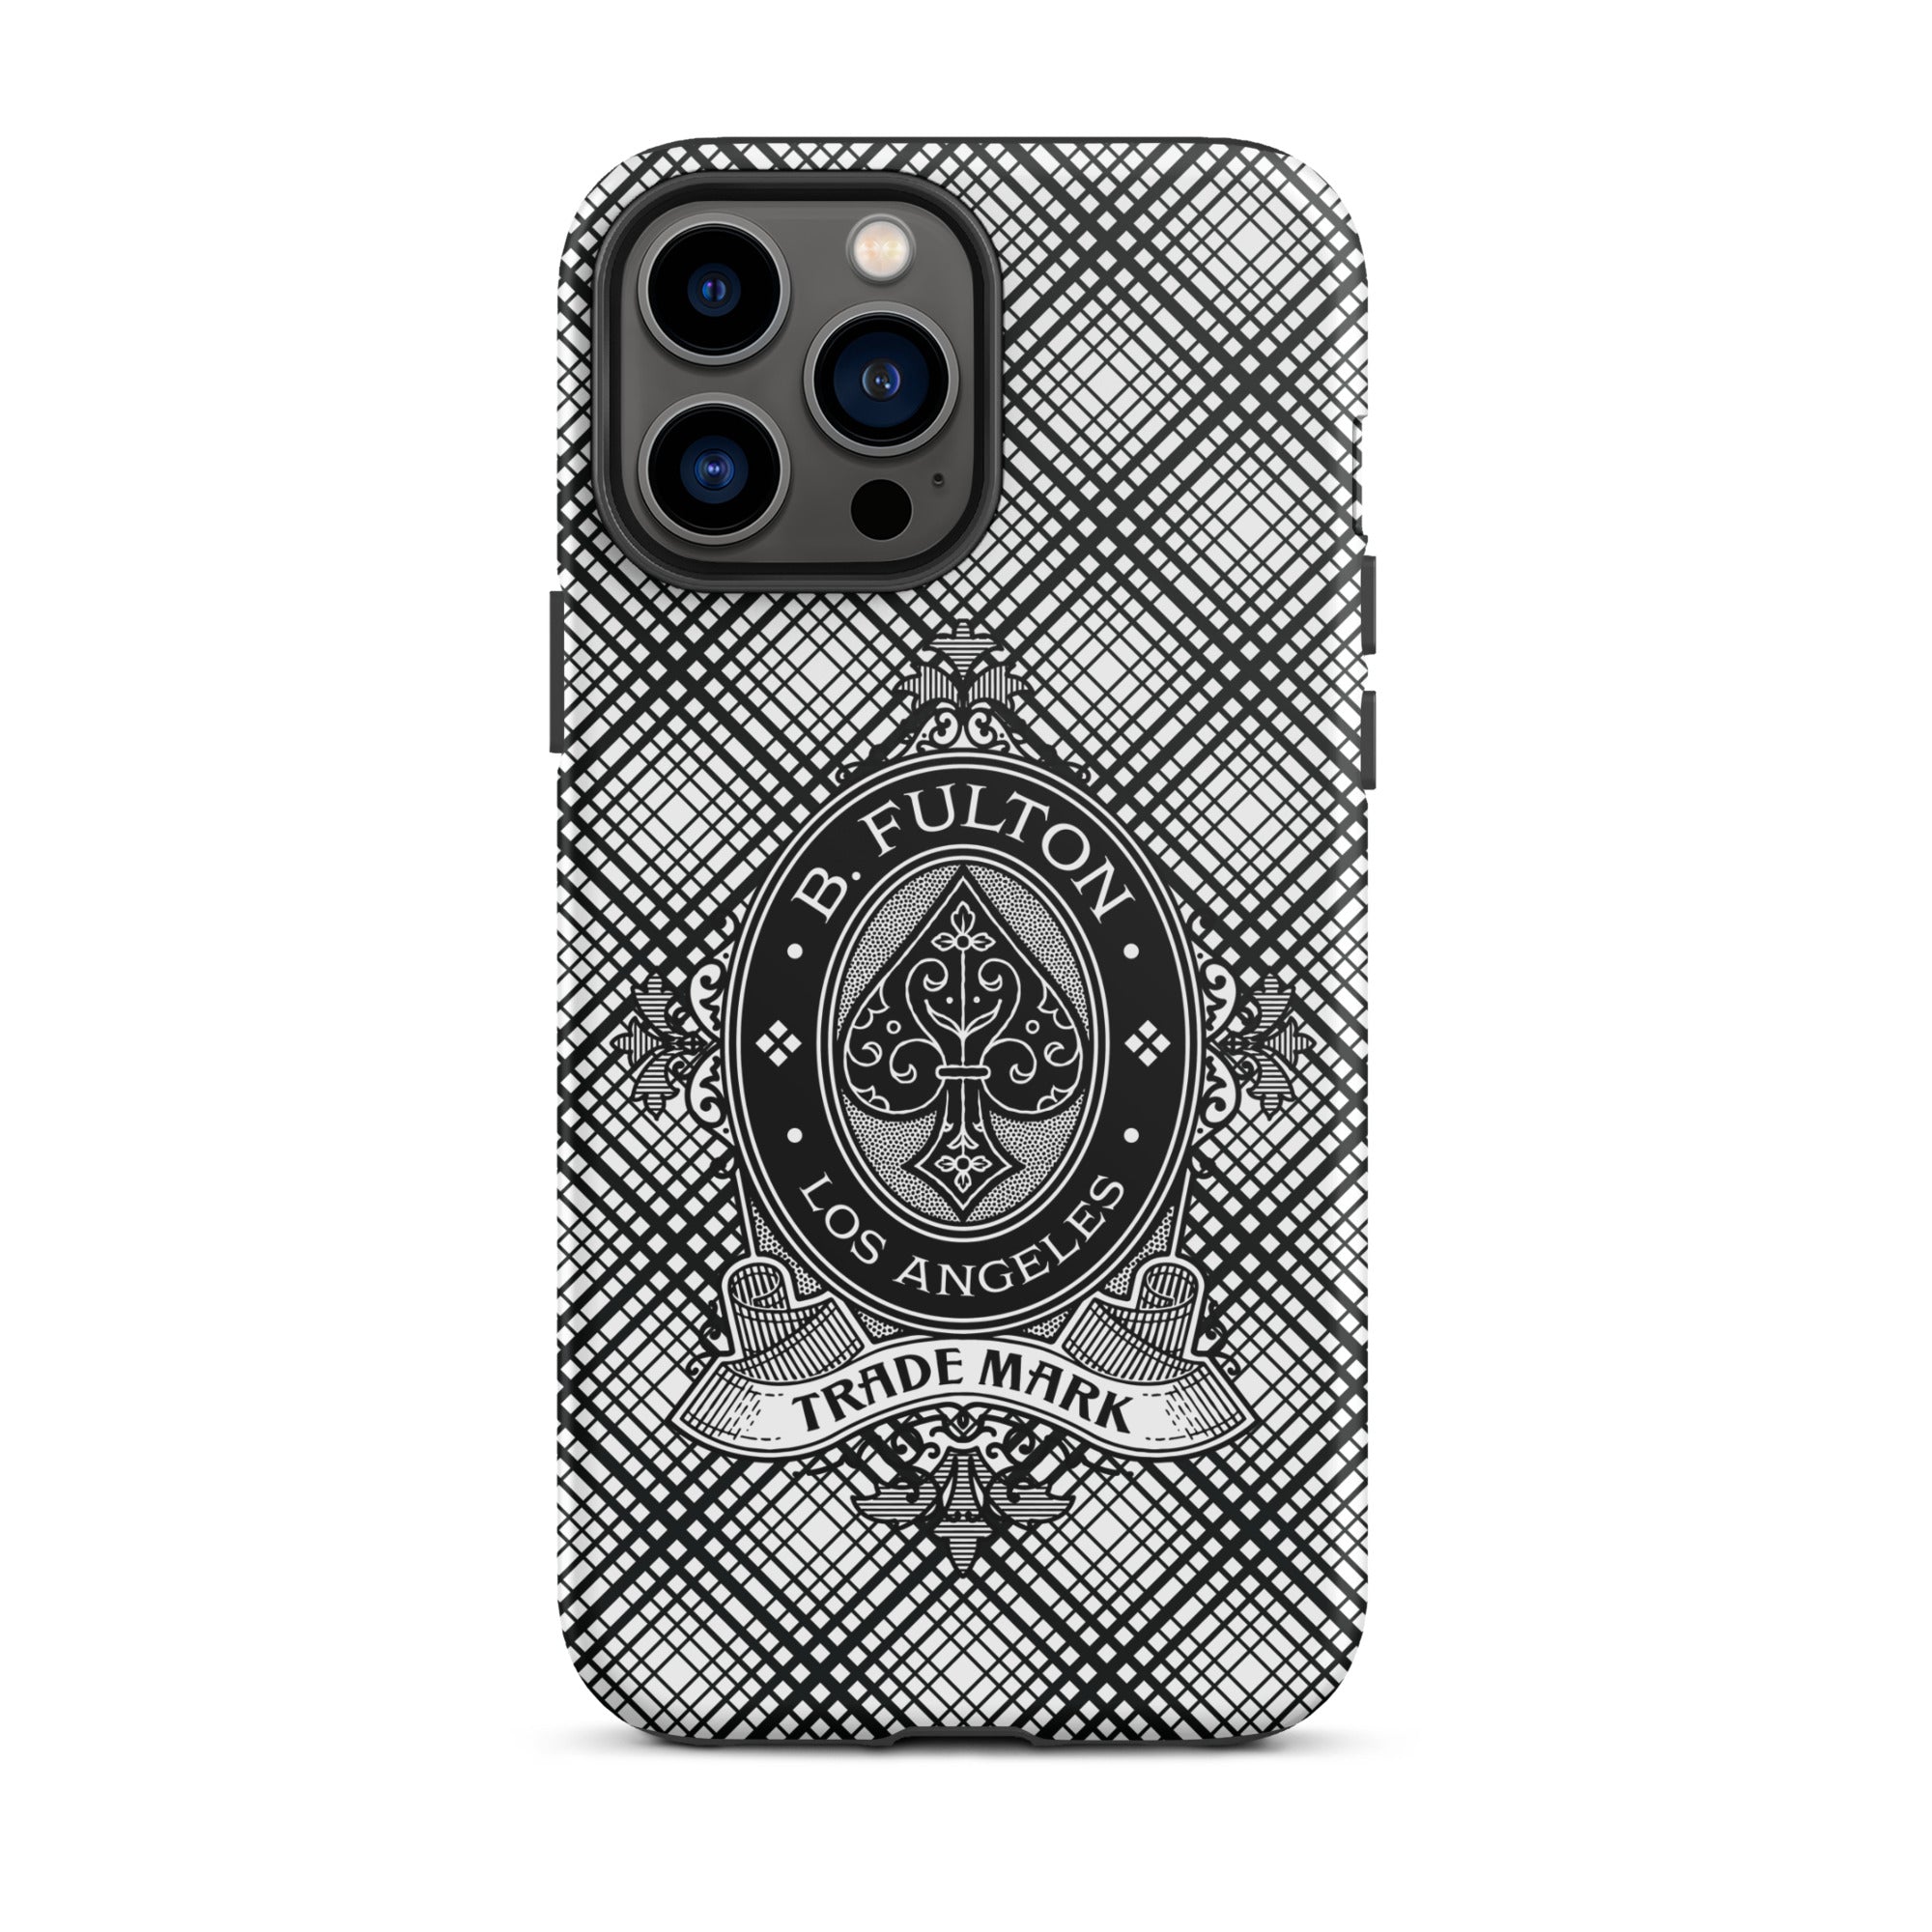 Fulton's Playing Cards Trademark Ace iPhone Case